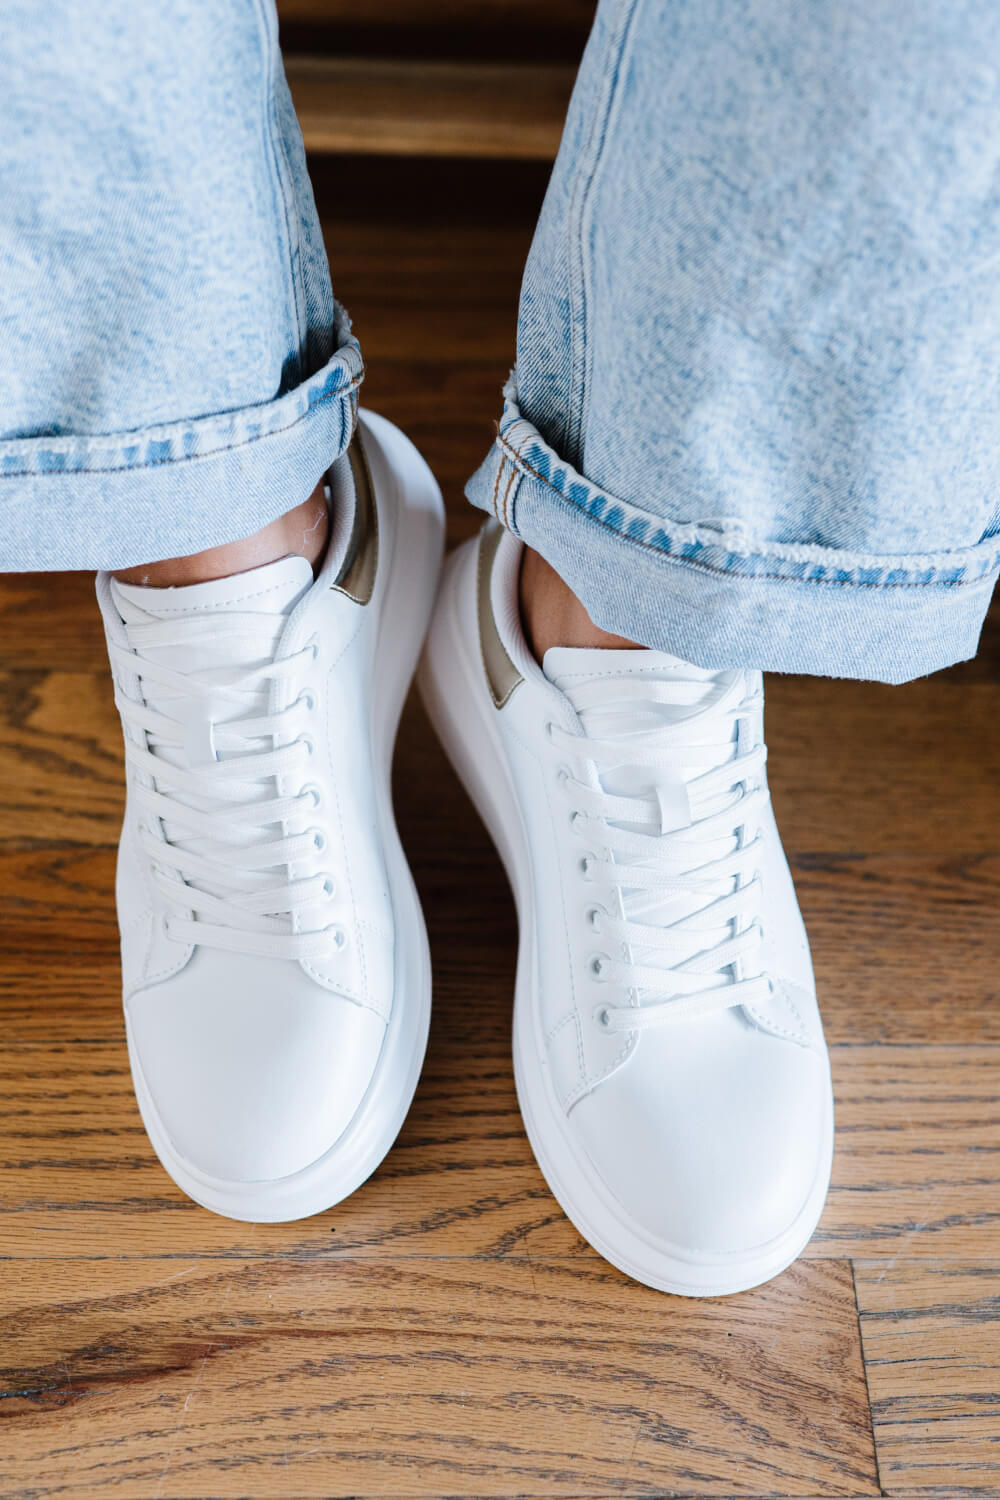 Berness Kicks and Giggles Chunky Sole Sneakers in White and Gold